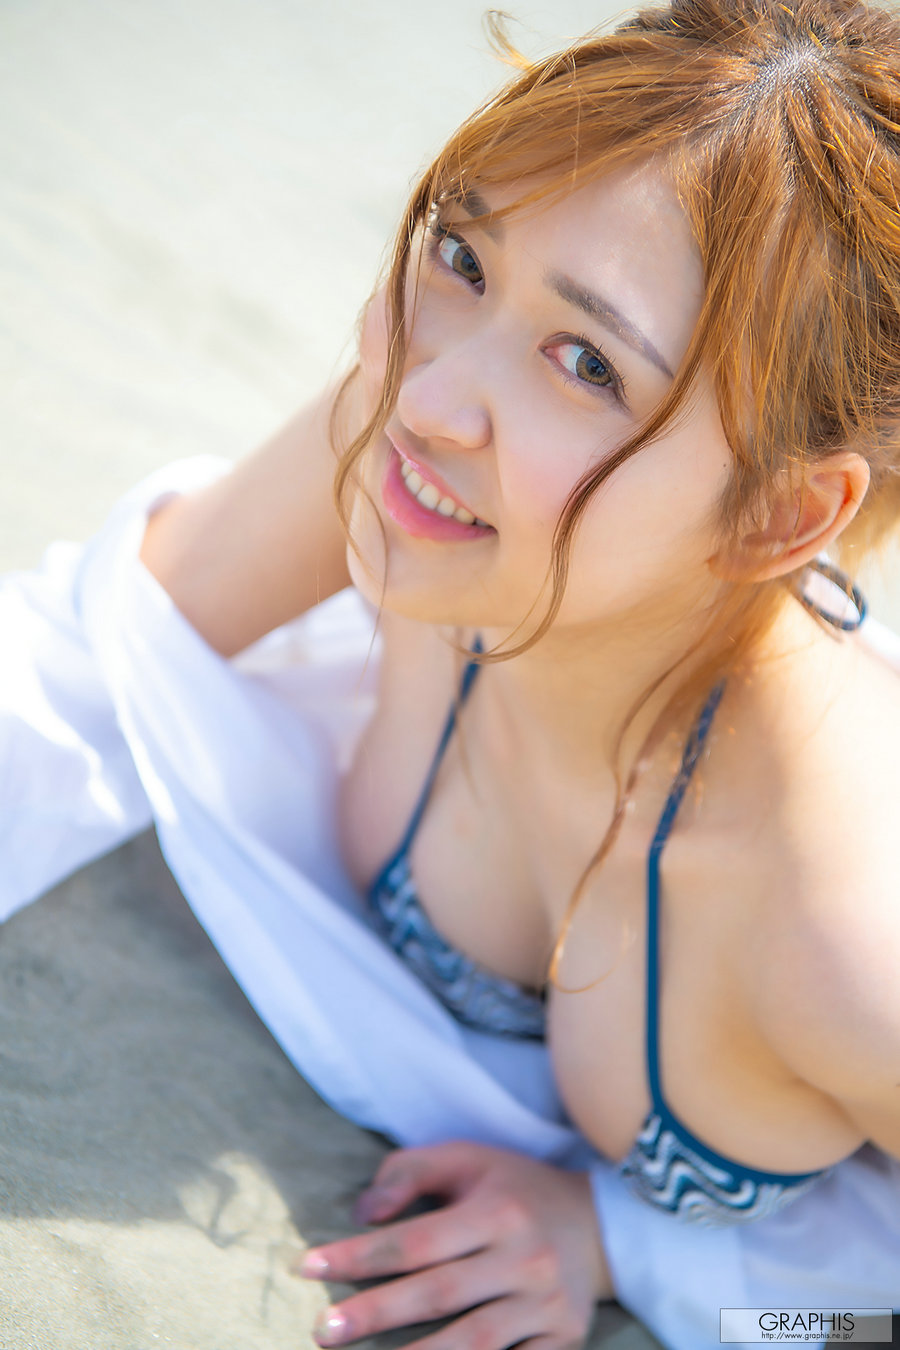 [Graphis] First Gravure 初脱ぎ娘 No.170 An Mitsumi 蜜美杏